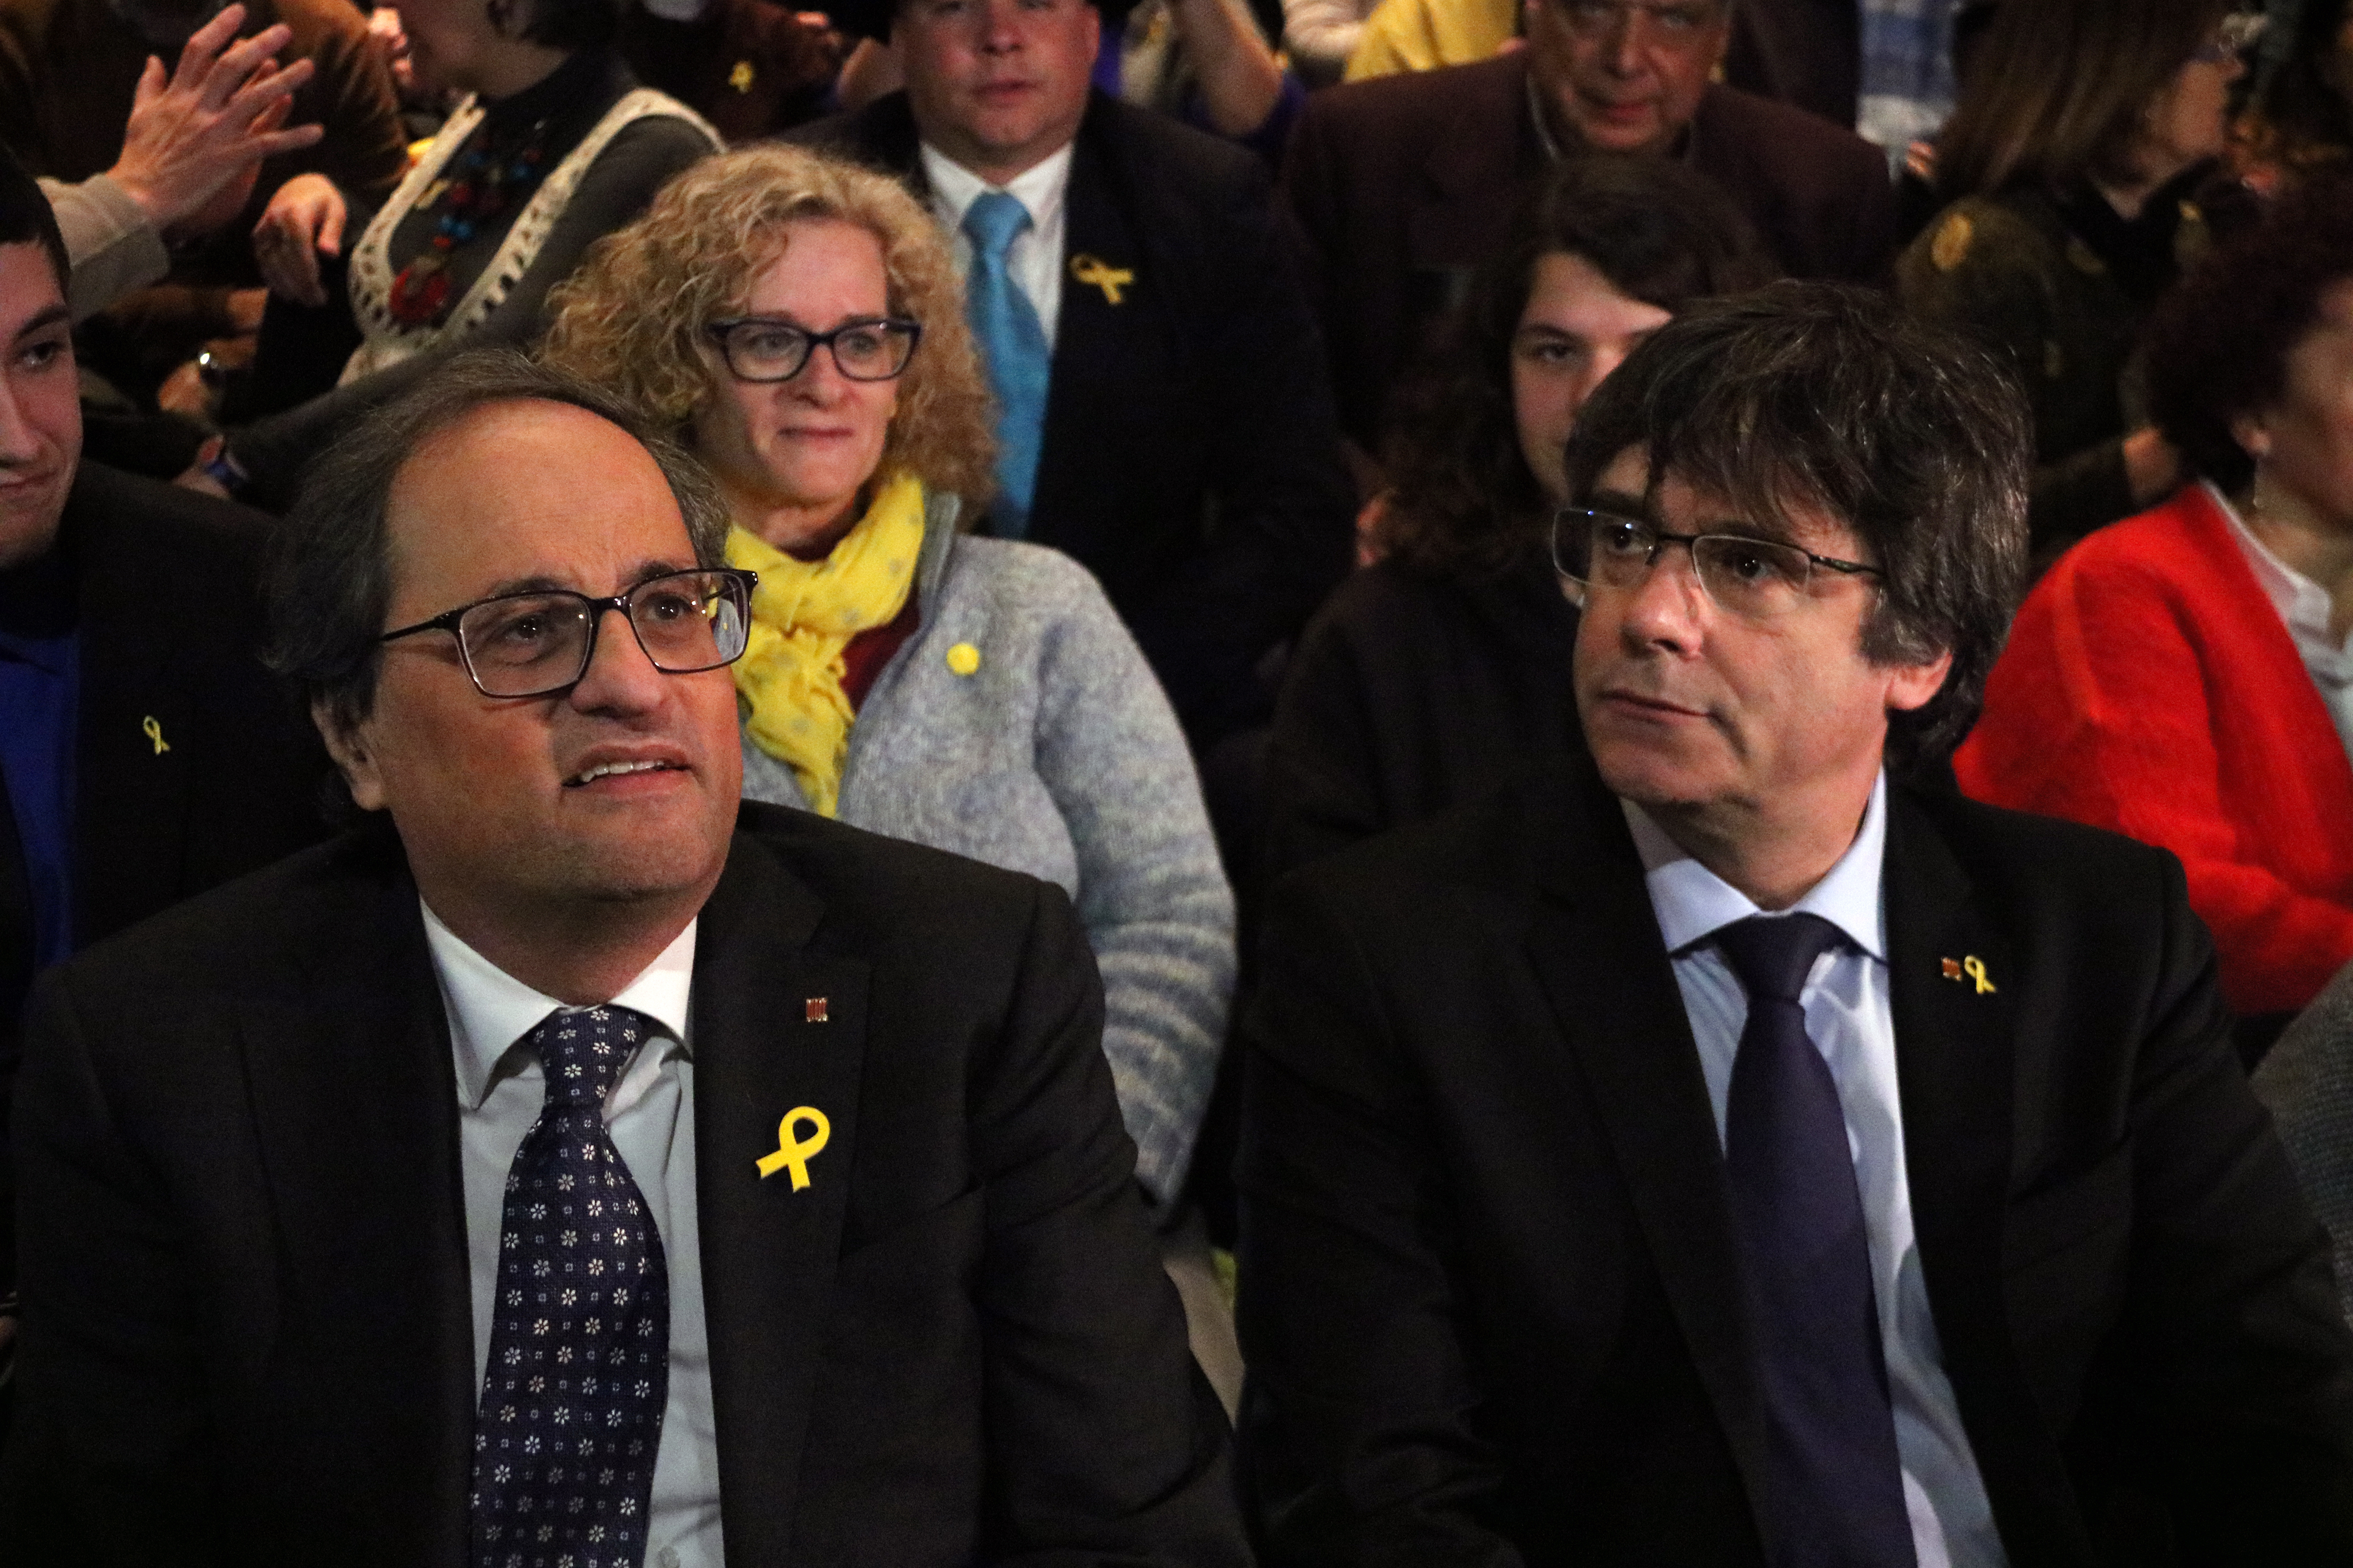 Catalan president Quim Torra and his predecessor Carles Puigdemont at the presentation for the Council for the Republic in Brussels on December 8 2018 (by Natàlia Segura)